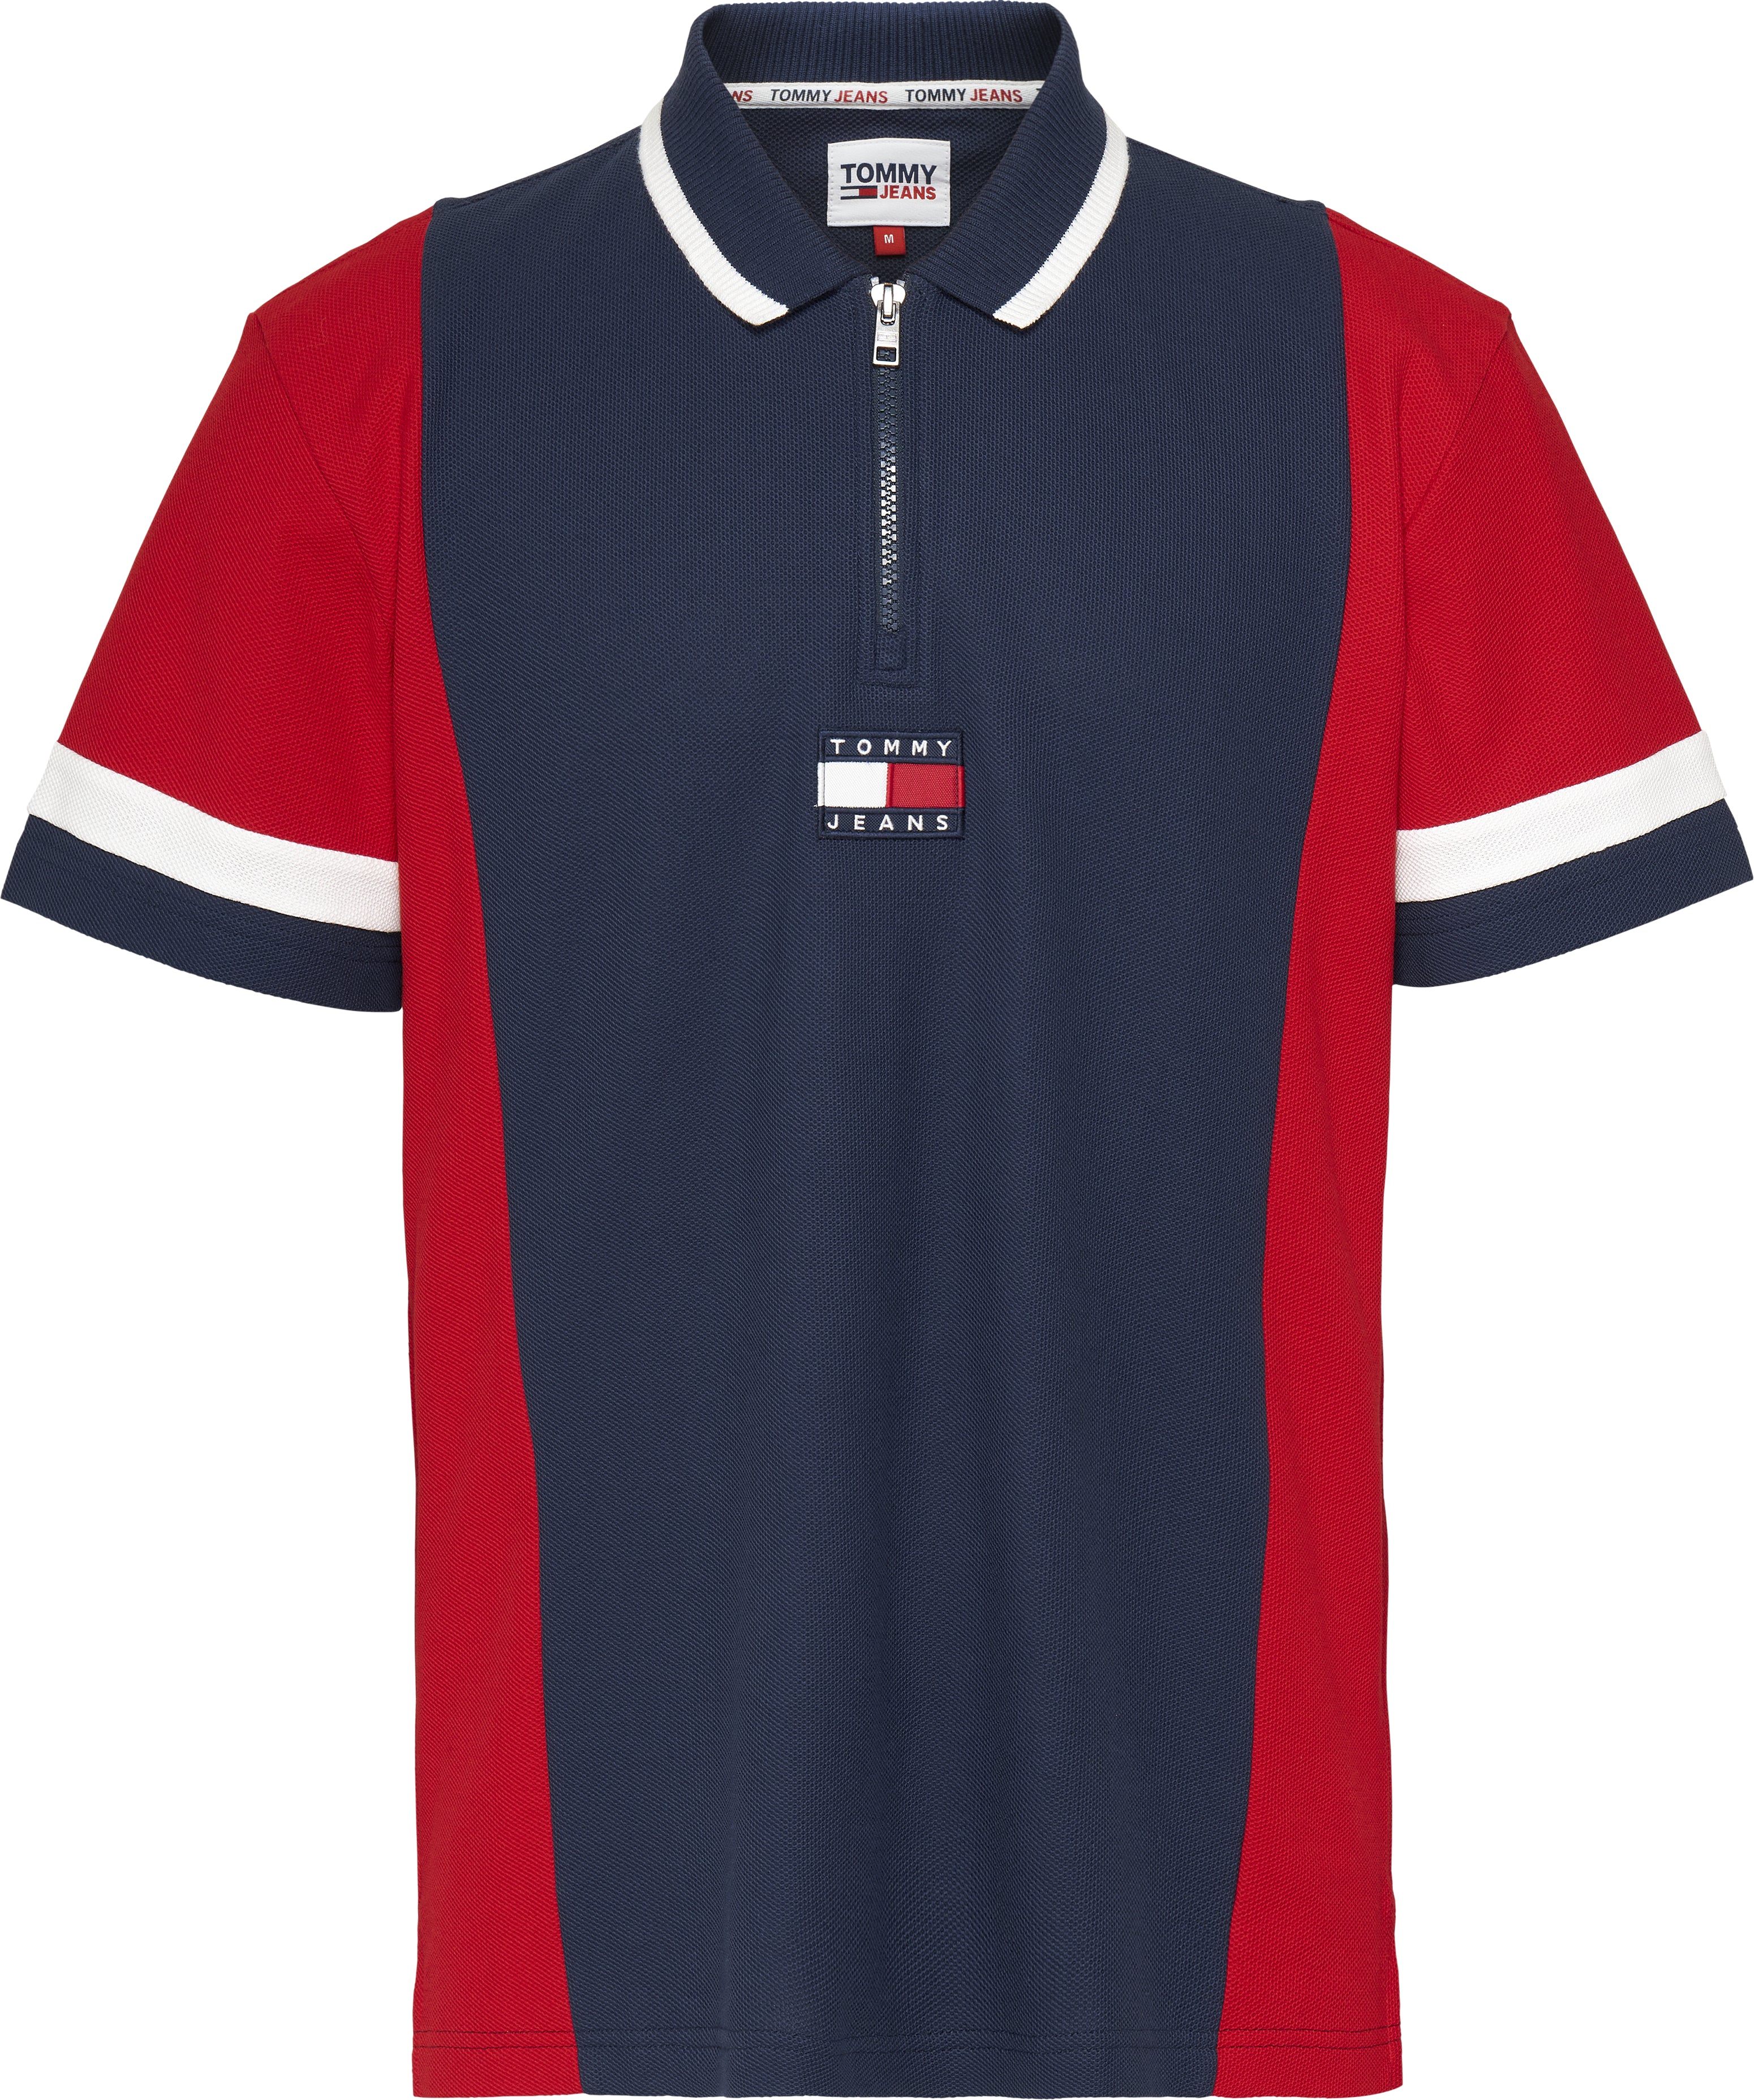 Polo Tommy Jeans marine pour homme | Georgespaul